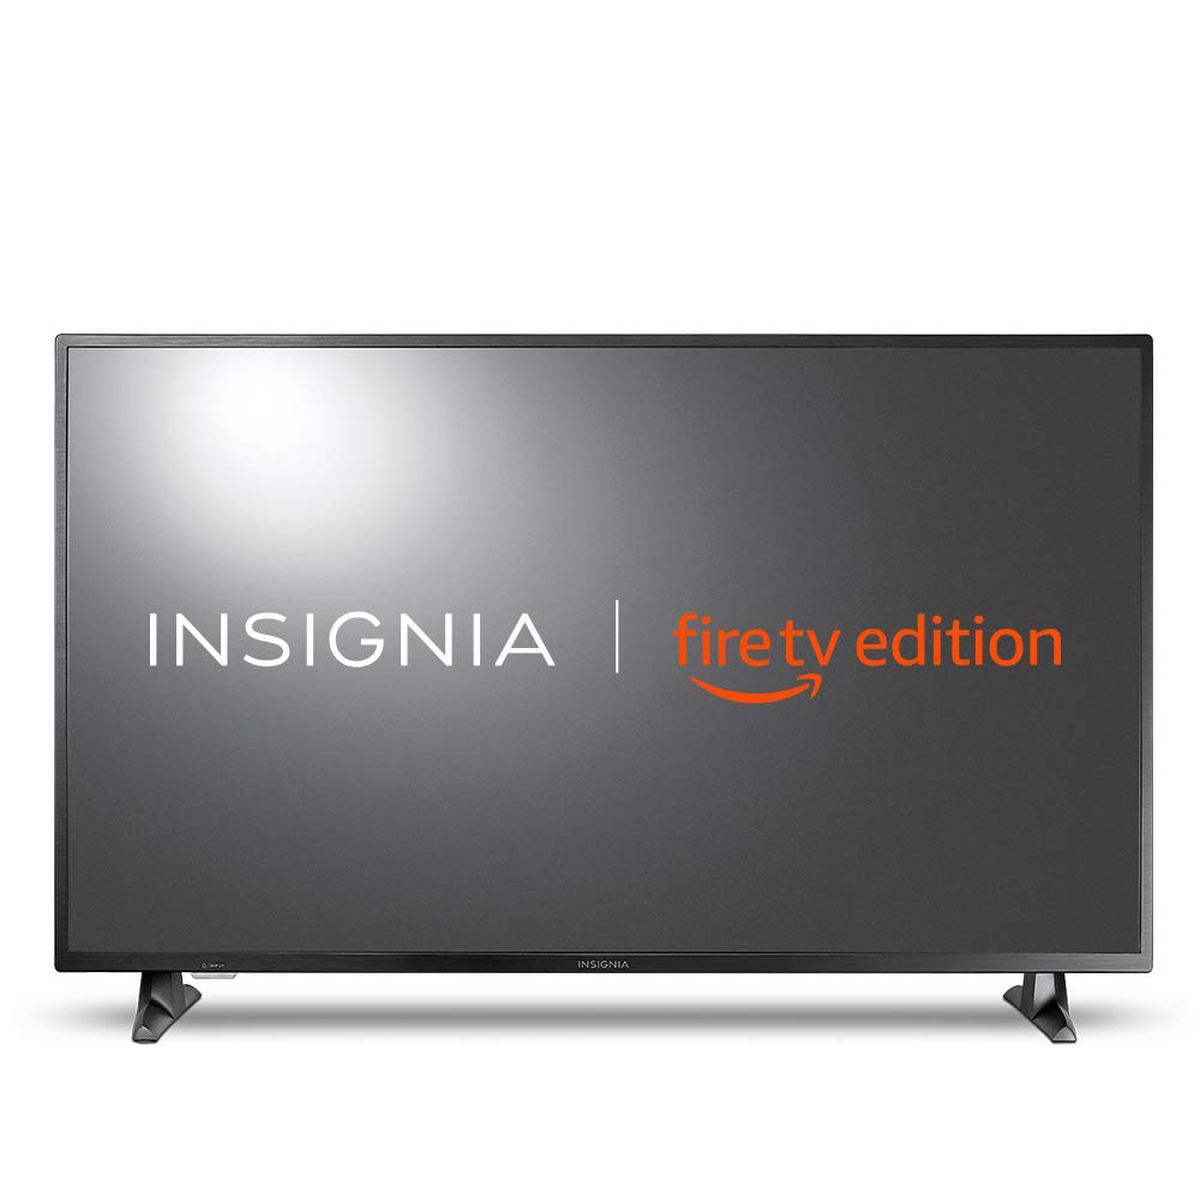 Product shot of Insignia’s Fire TV Edition 4K TV